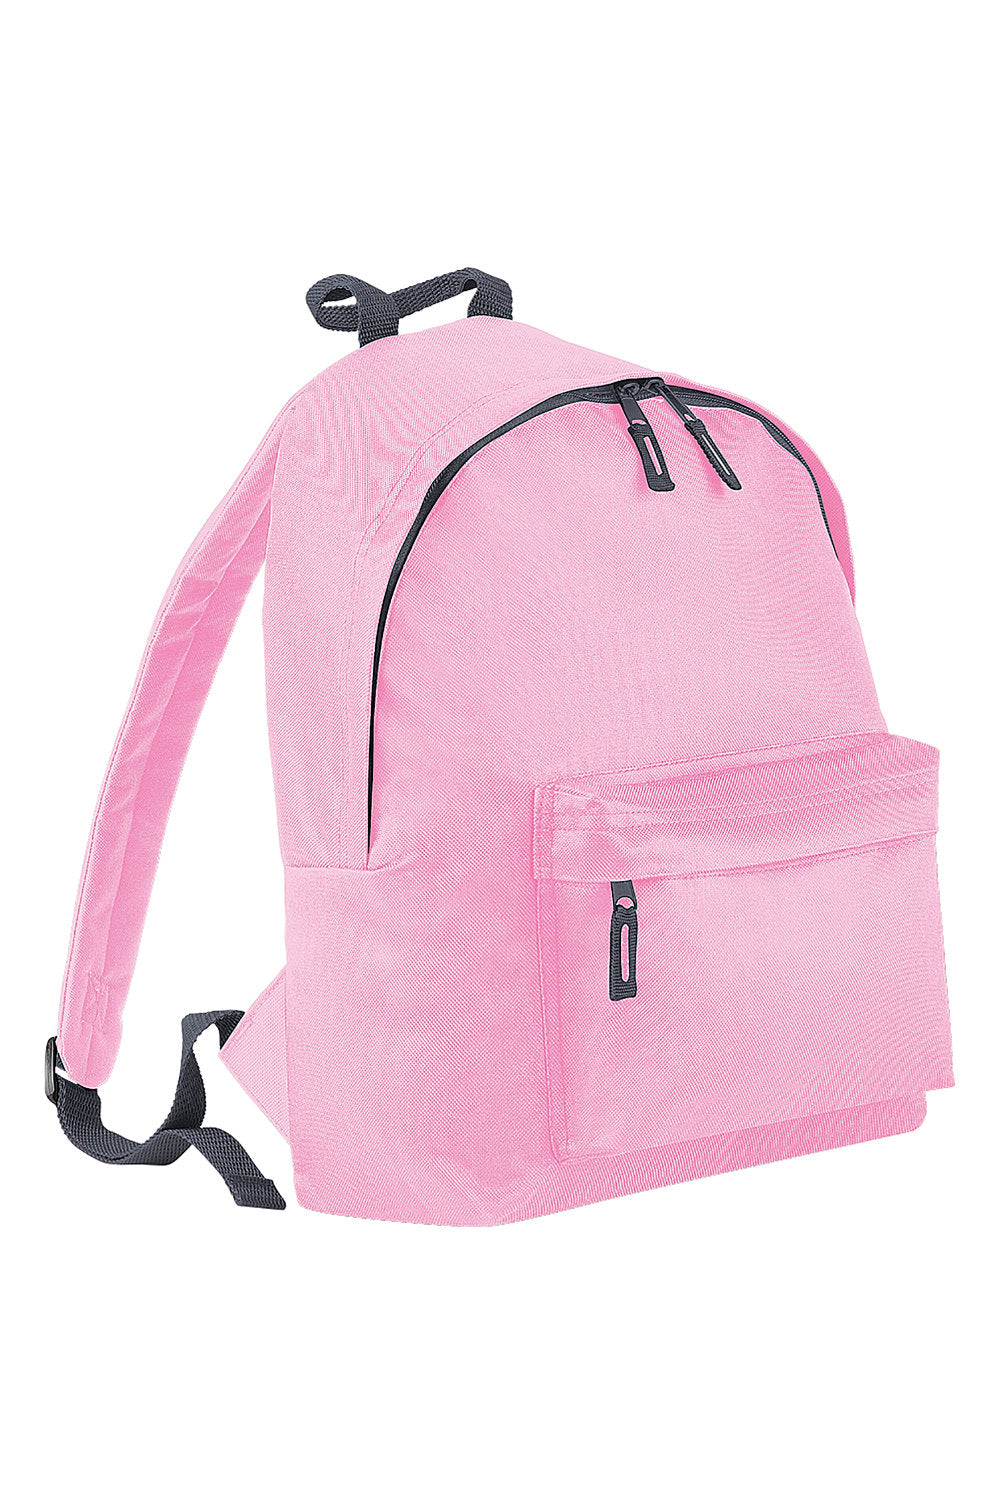 Fashion Backpack / Rucksack - Classic Pink/Graphite